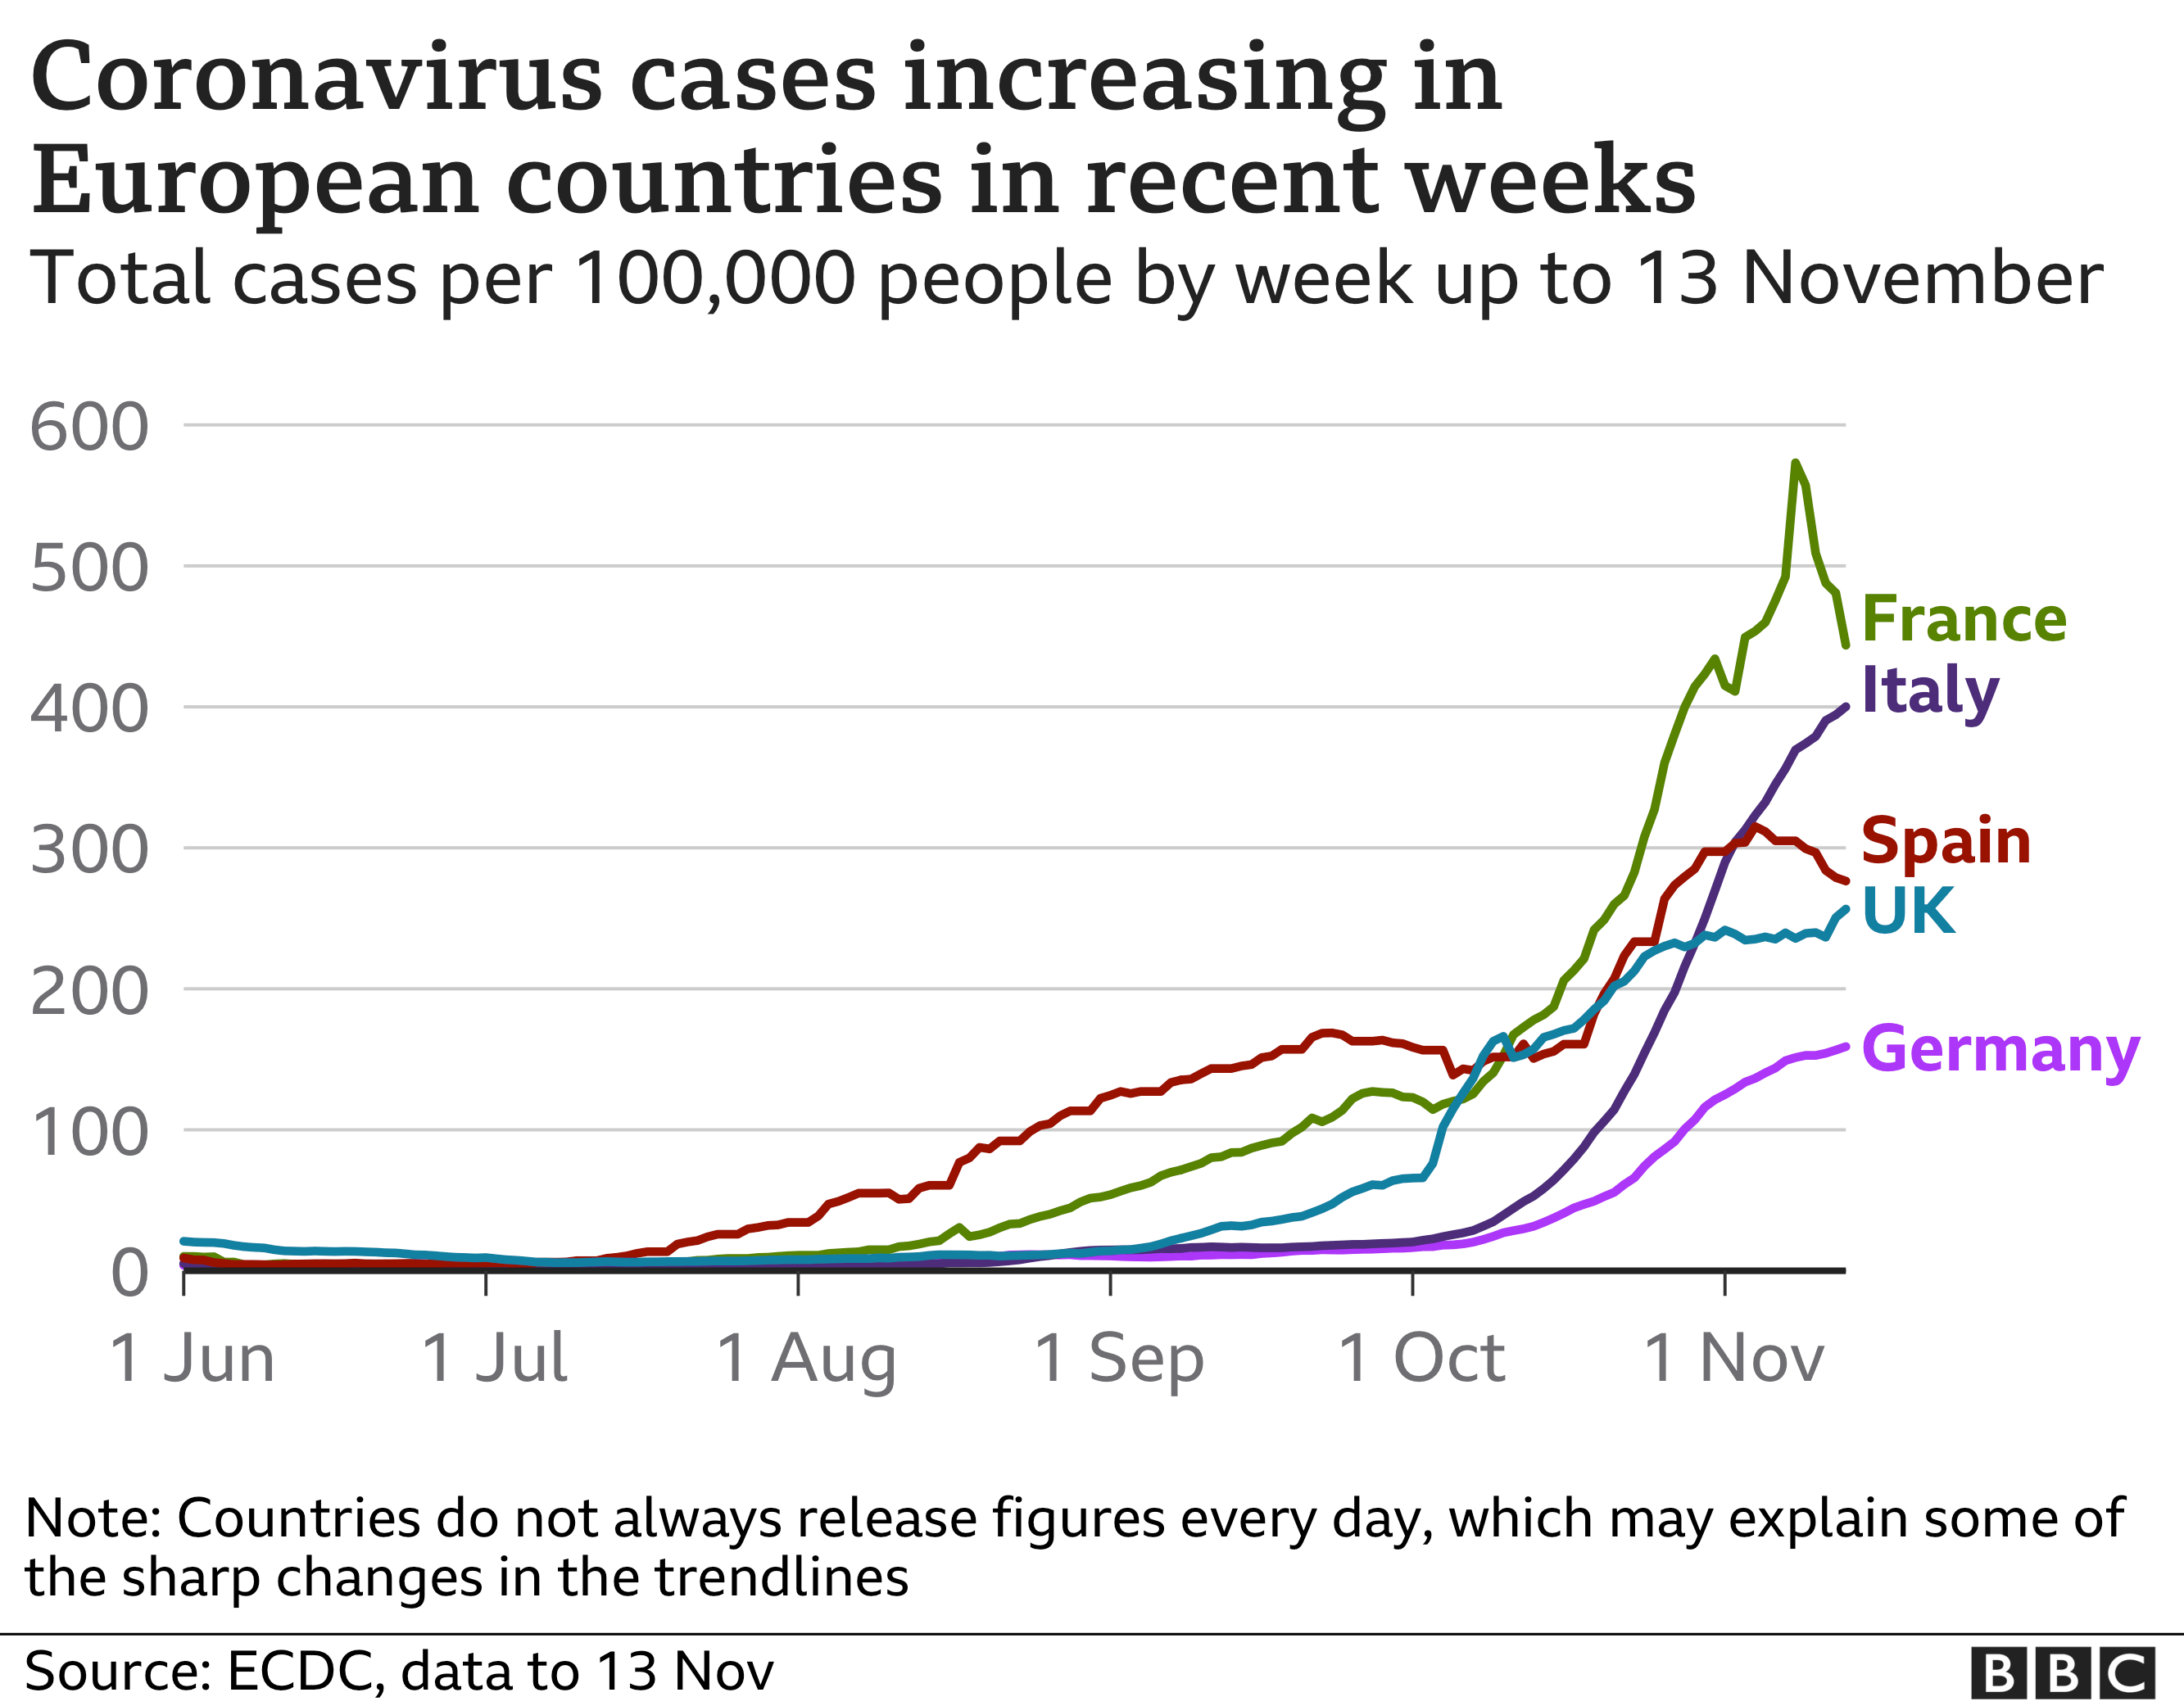 A chart showing the increase in reported coronavirus infections in European countries